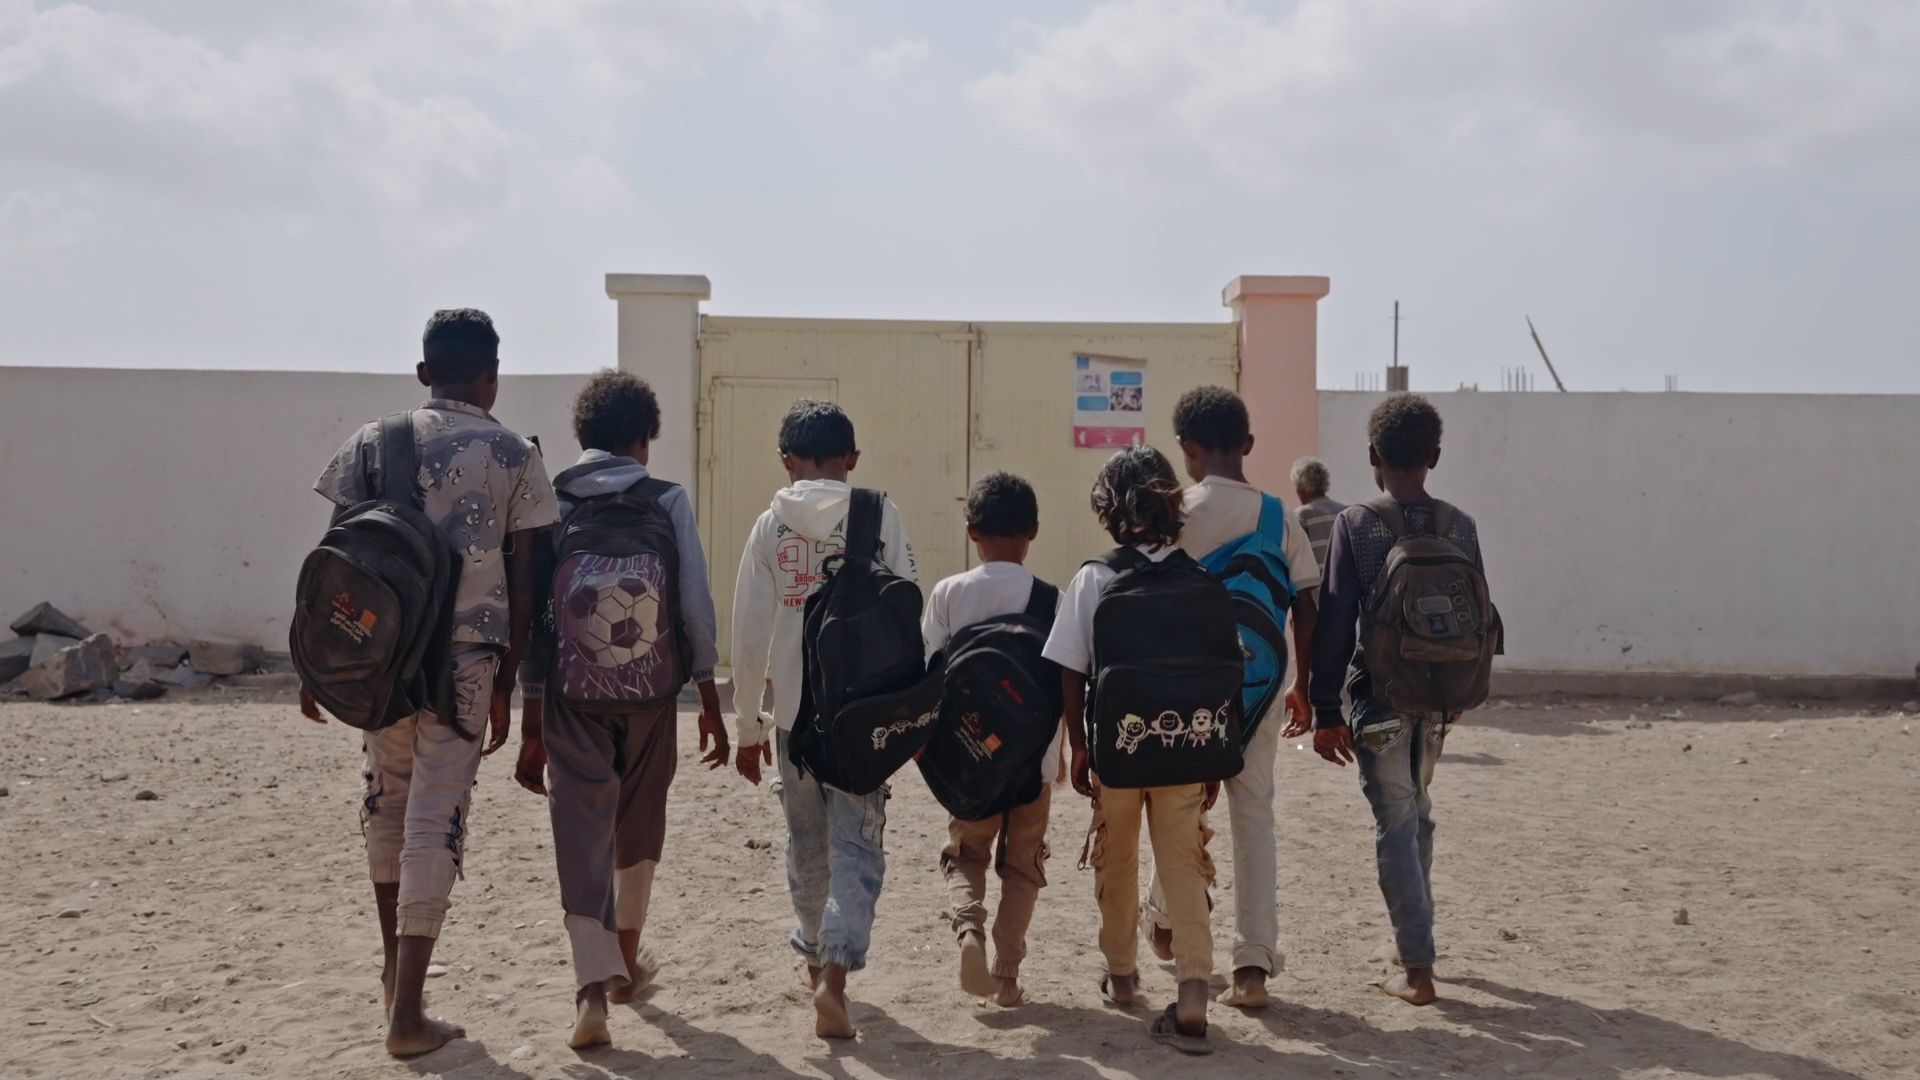 A group of children carrying backpacks make their way toward a large gate at a school in Lahj, Yemen